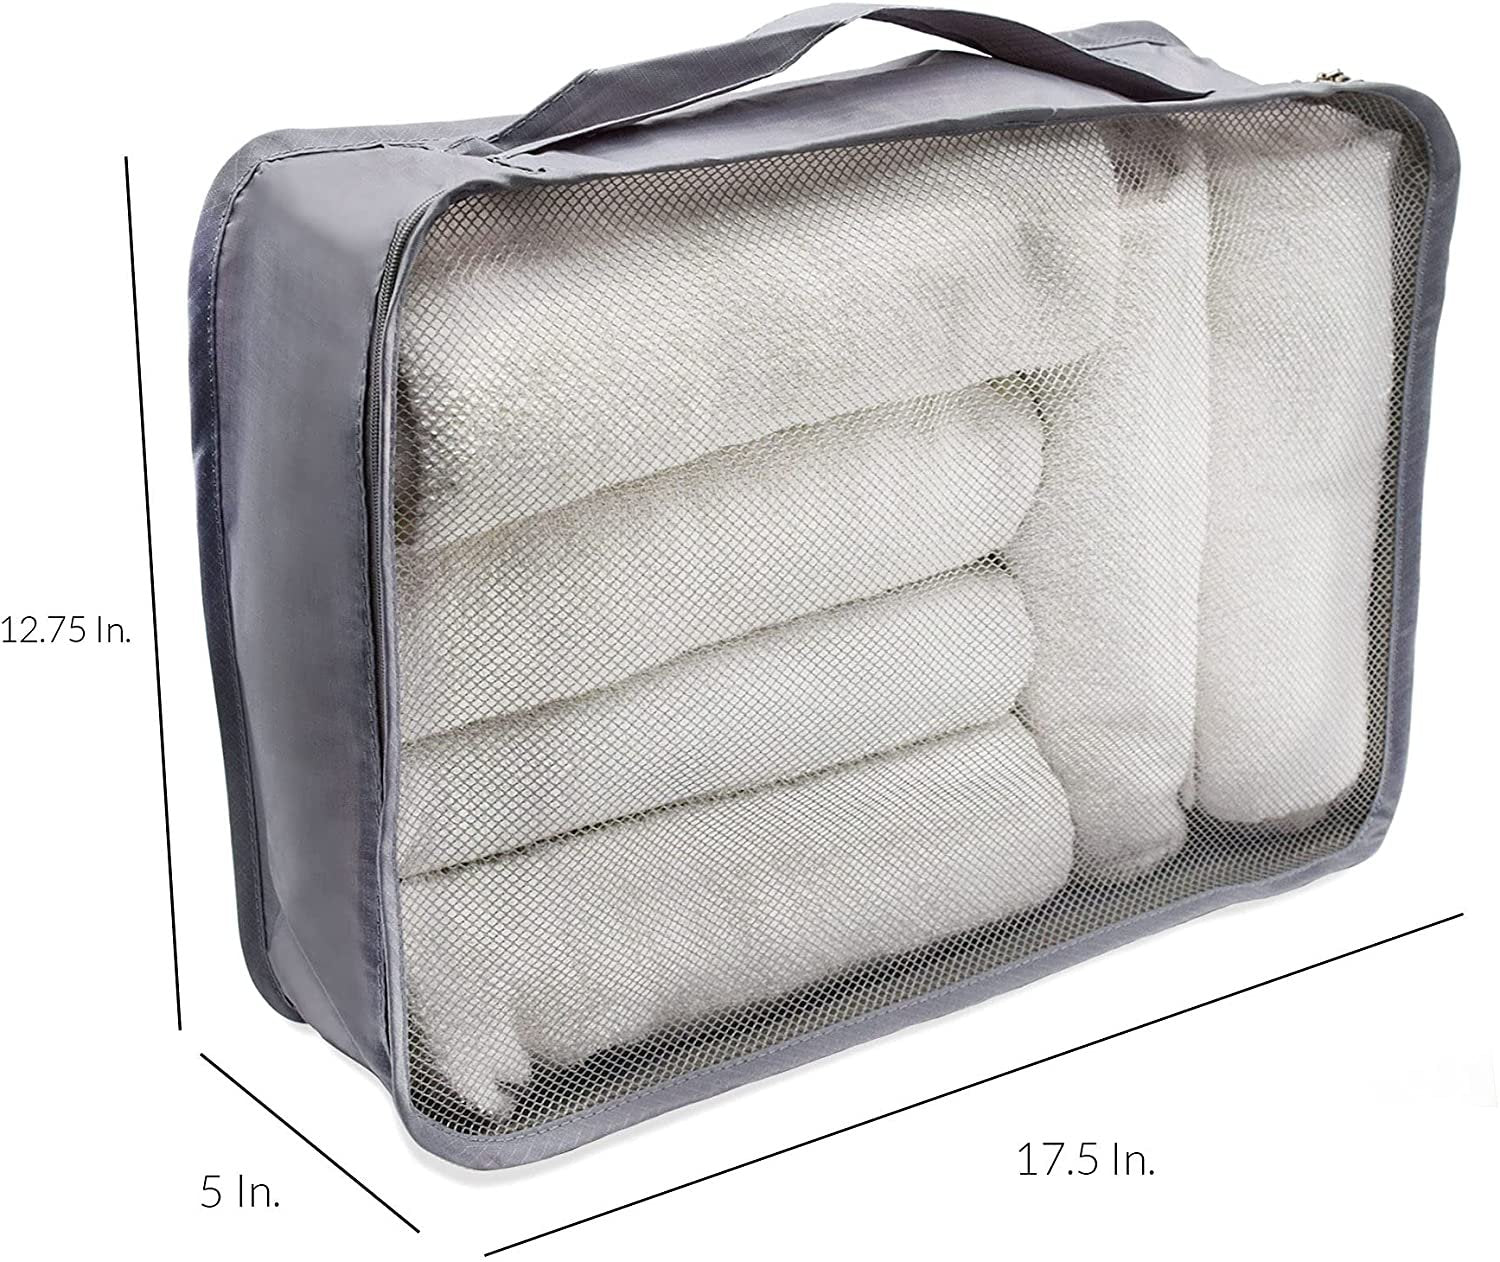 High-Capacity Gray Packing Cubes - 4 Pc Set, Large - Foldable, Lightweight Travel Organizers